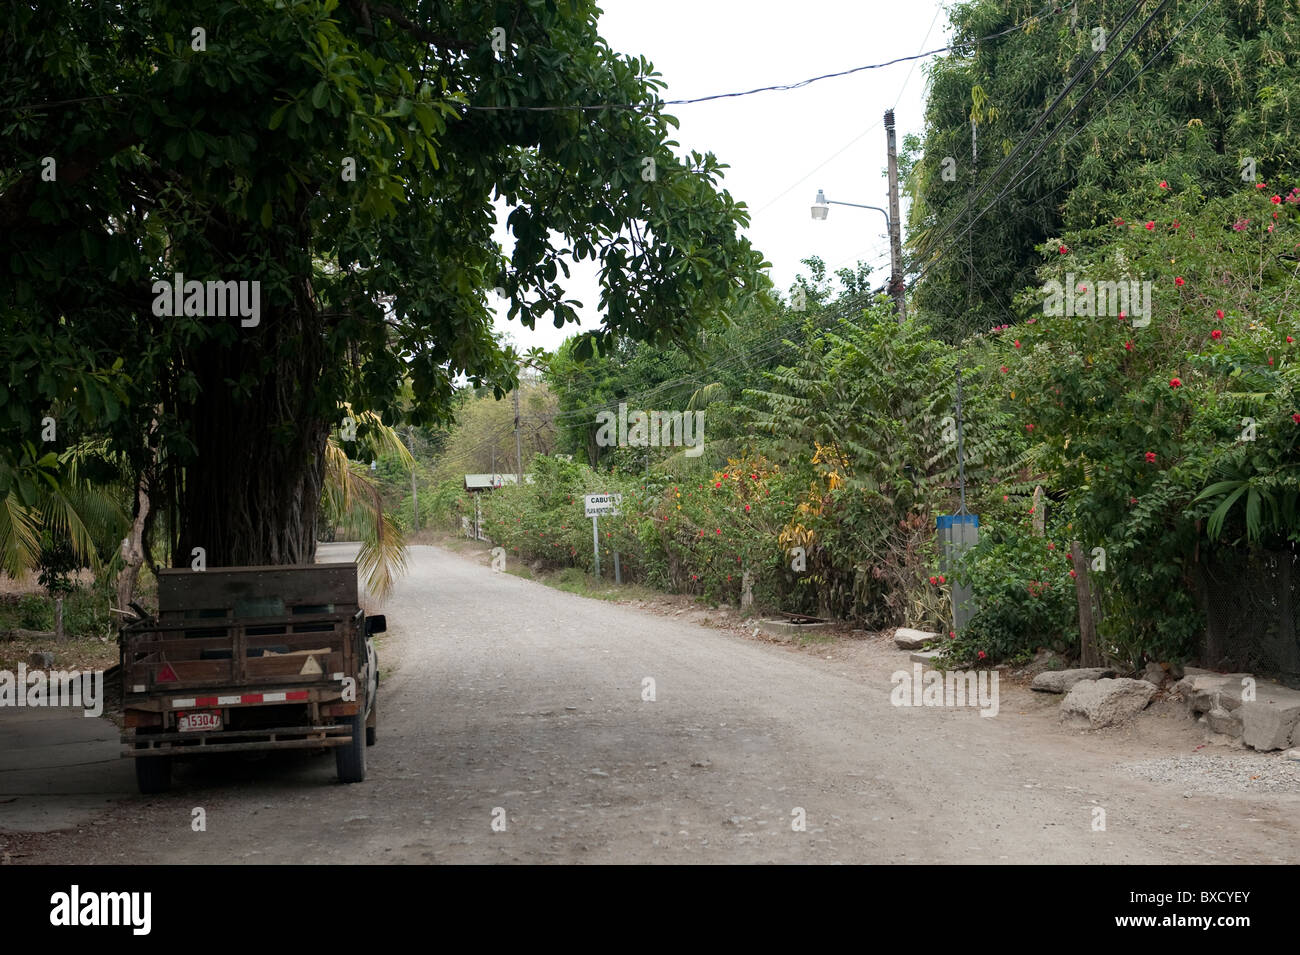 Treed rural road in the tropical forest of Costa Rica with a parked green pickup truck Stock Photo